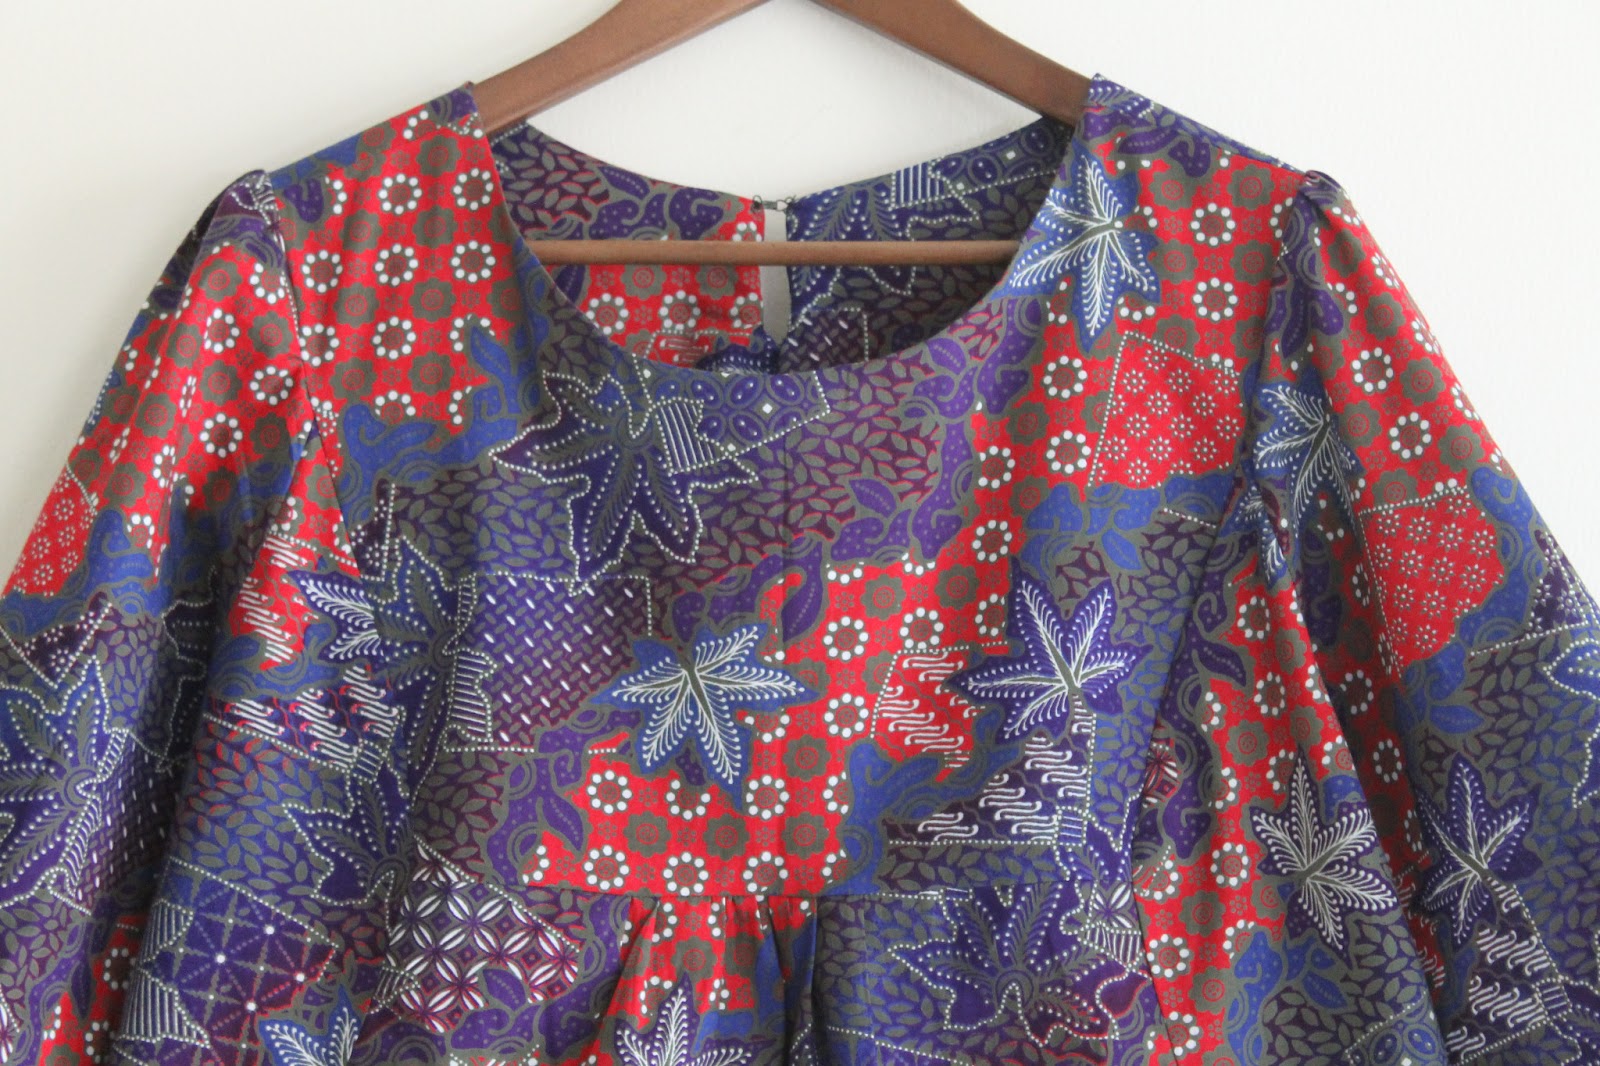 Cookin' & Craftin': Painted Portrait Blouse: Two Ways